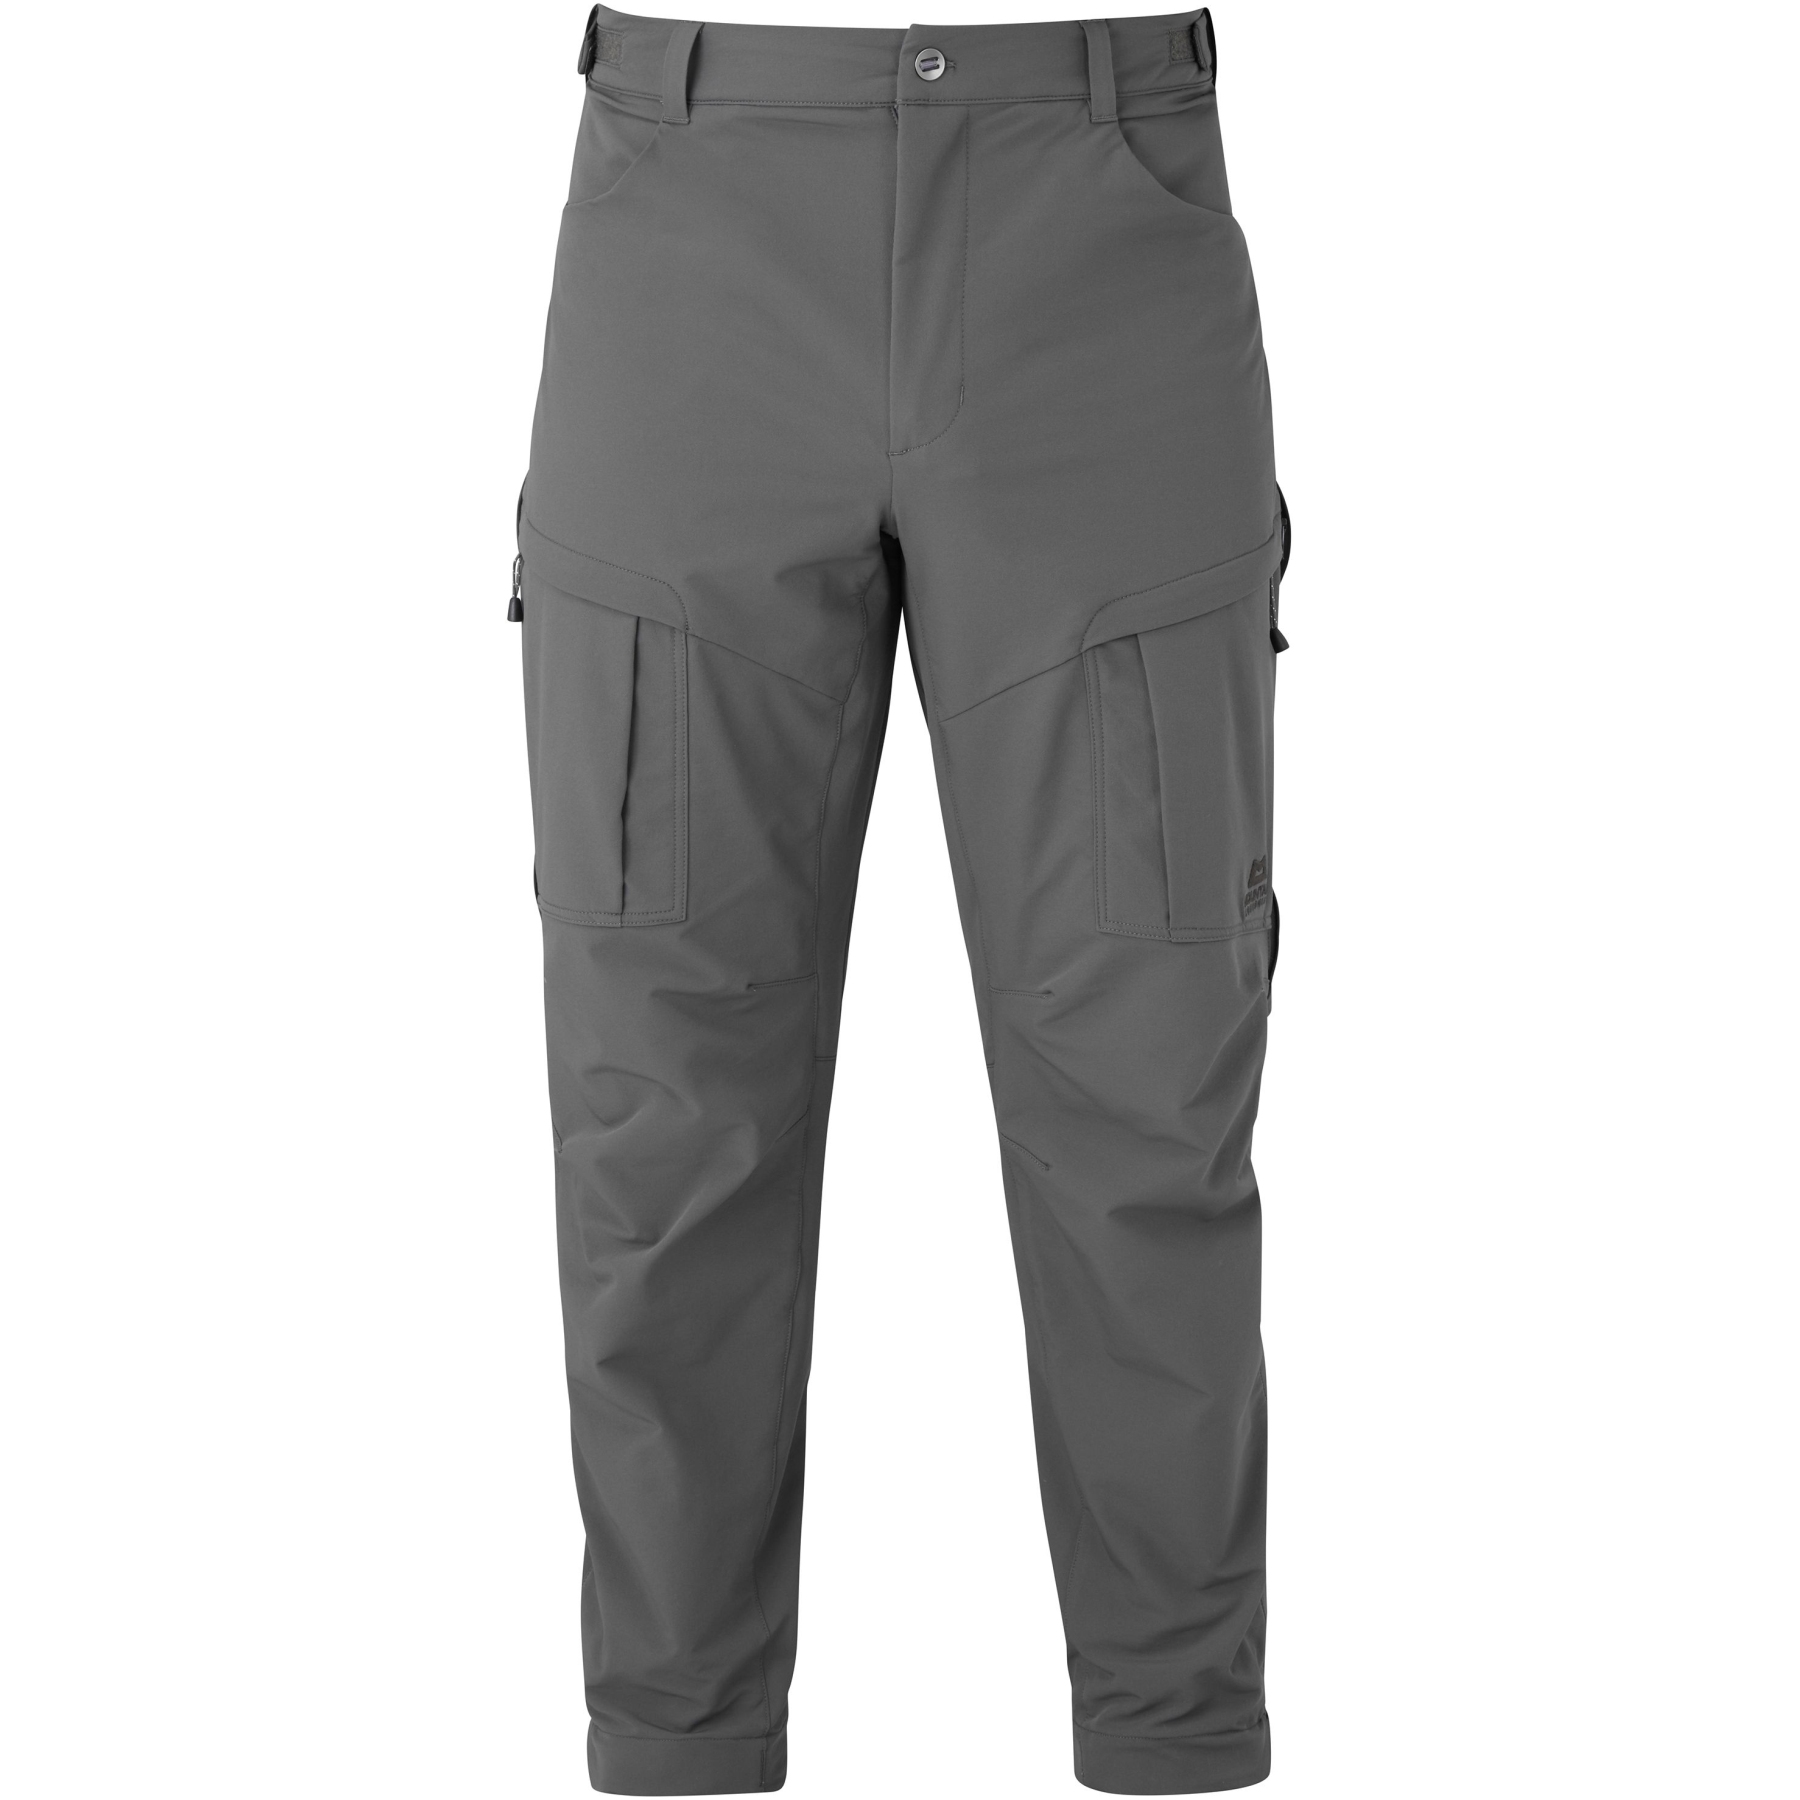 Picture of Mountain Equipment Ibex Pro Pants ME-005763 - Regular - anvil grey